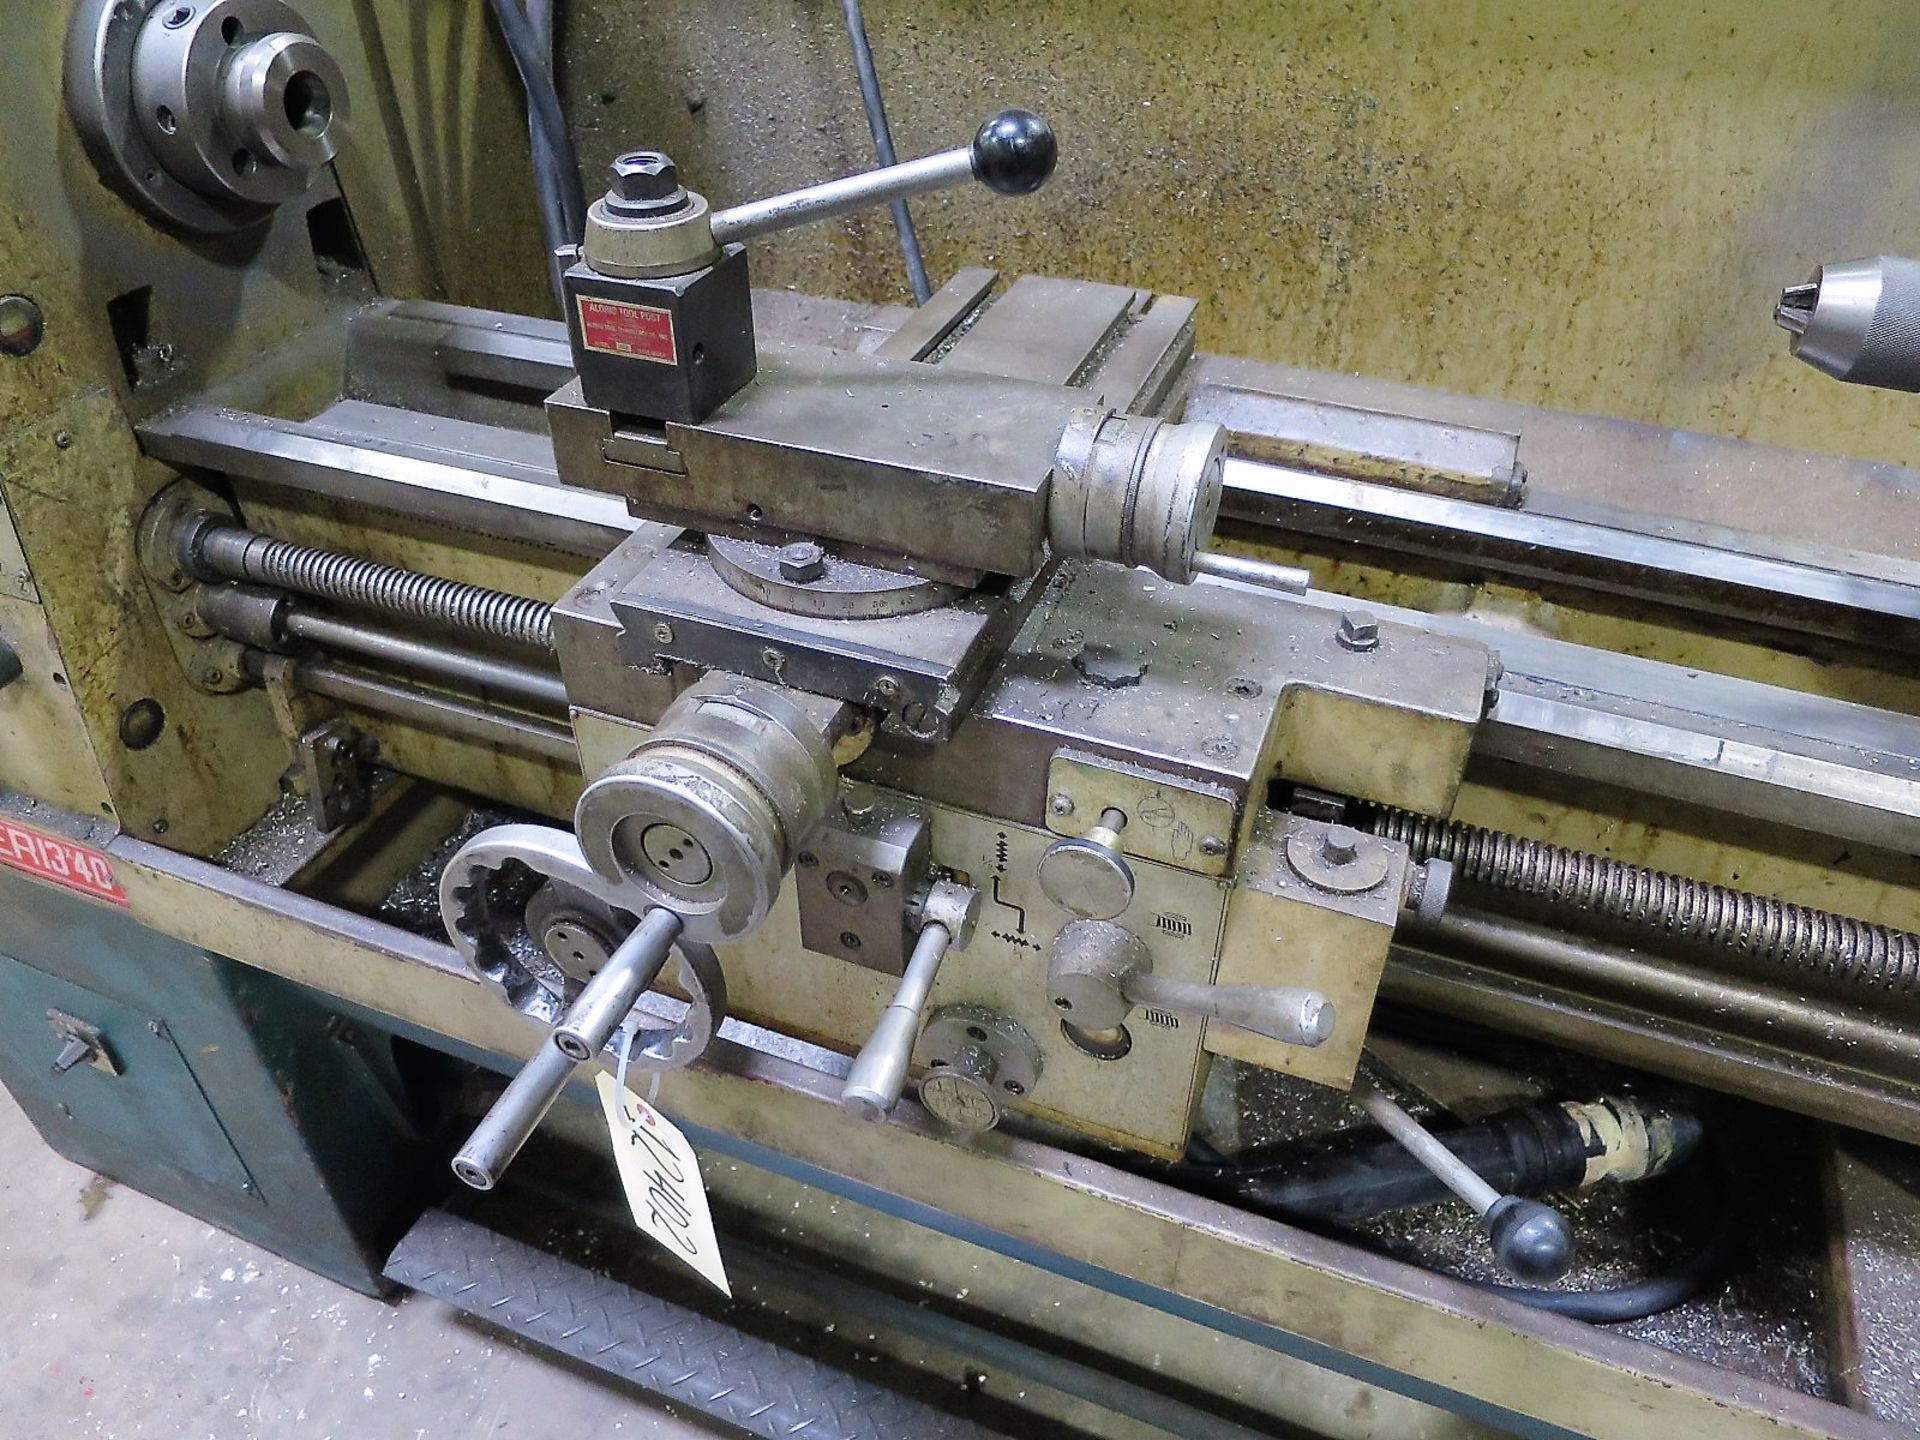 Turn master 1340 40" Center High Precision Engine Lathe, S/N 13482040499 - Image 4 of 6